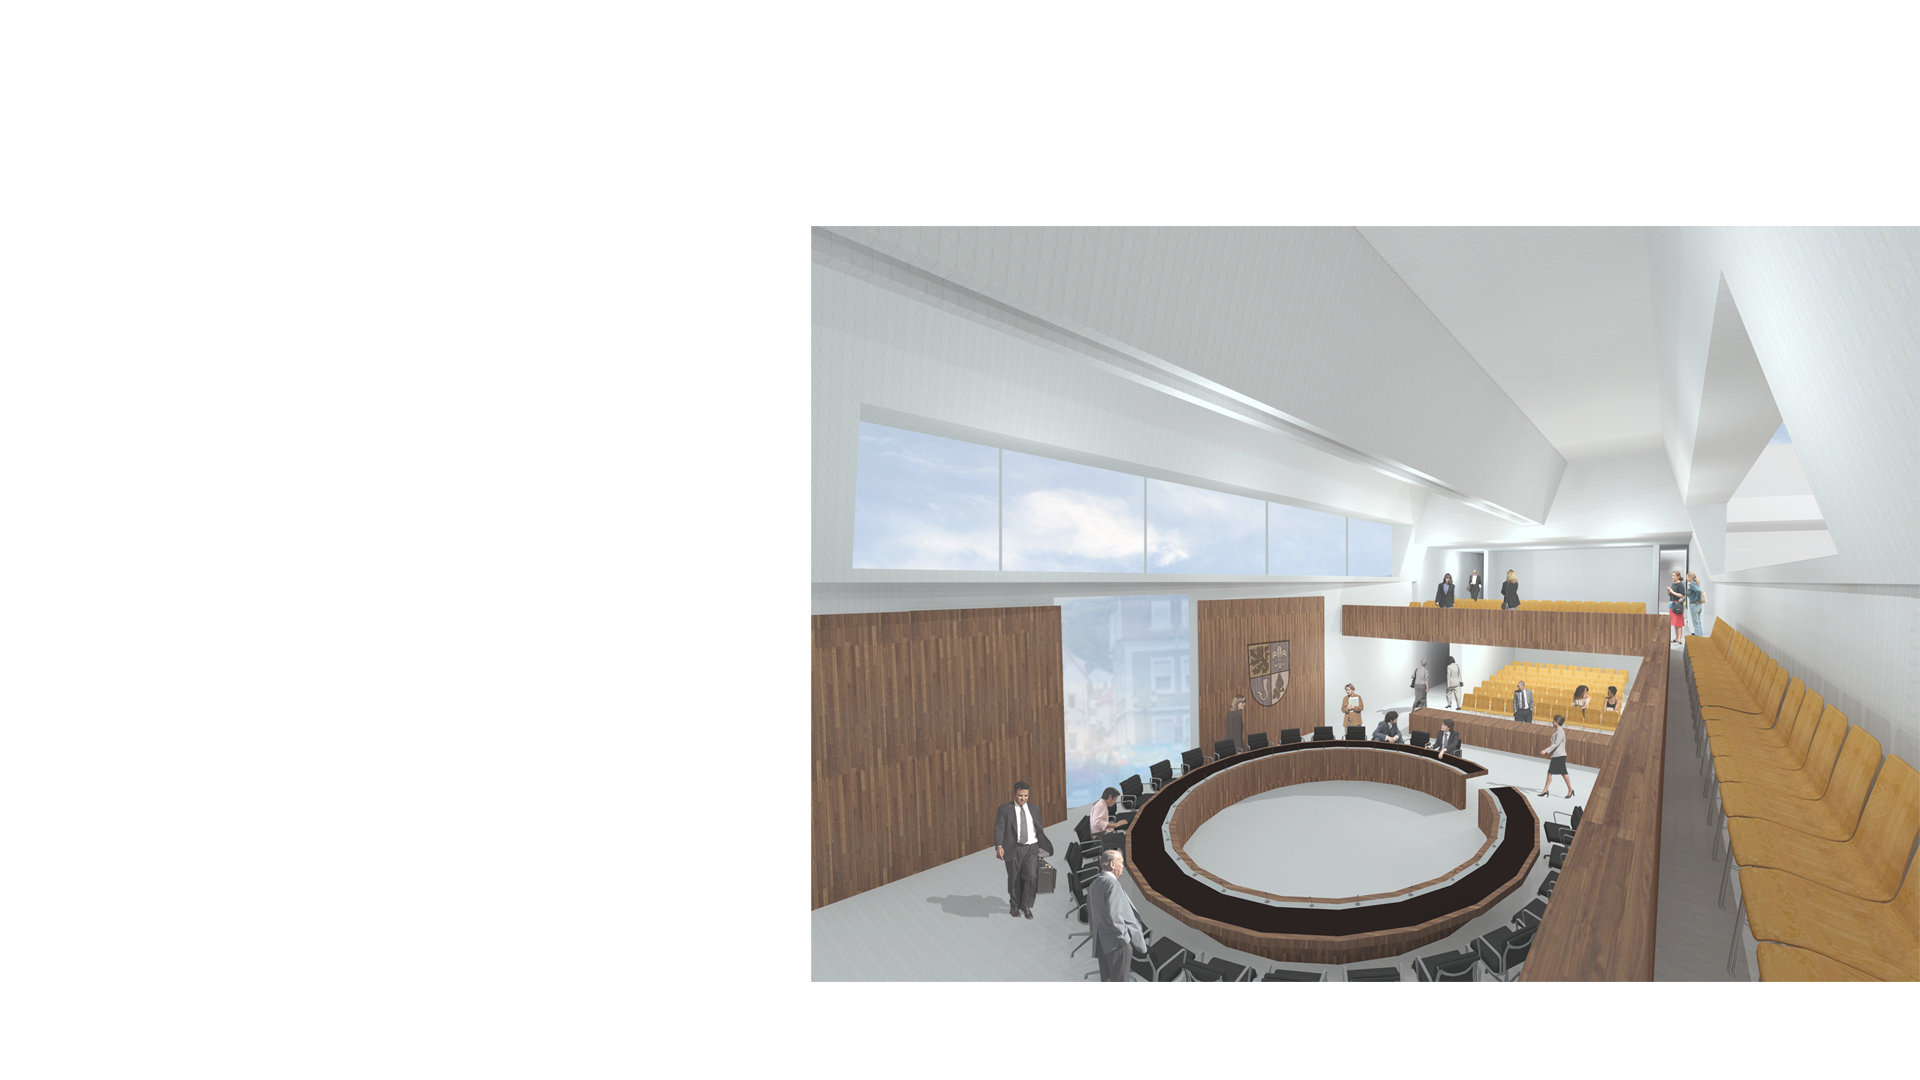 3D composite rendering of the council chamber Neubau Rathaus Stadt Leimen Germany